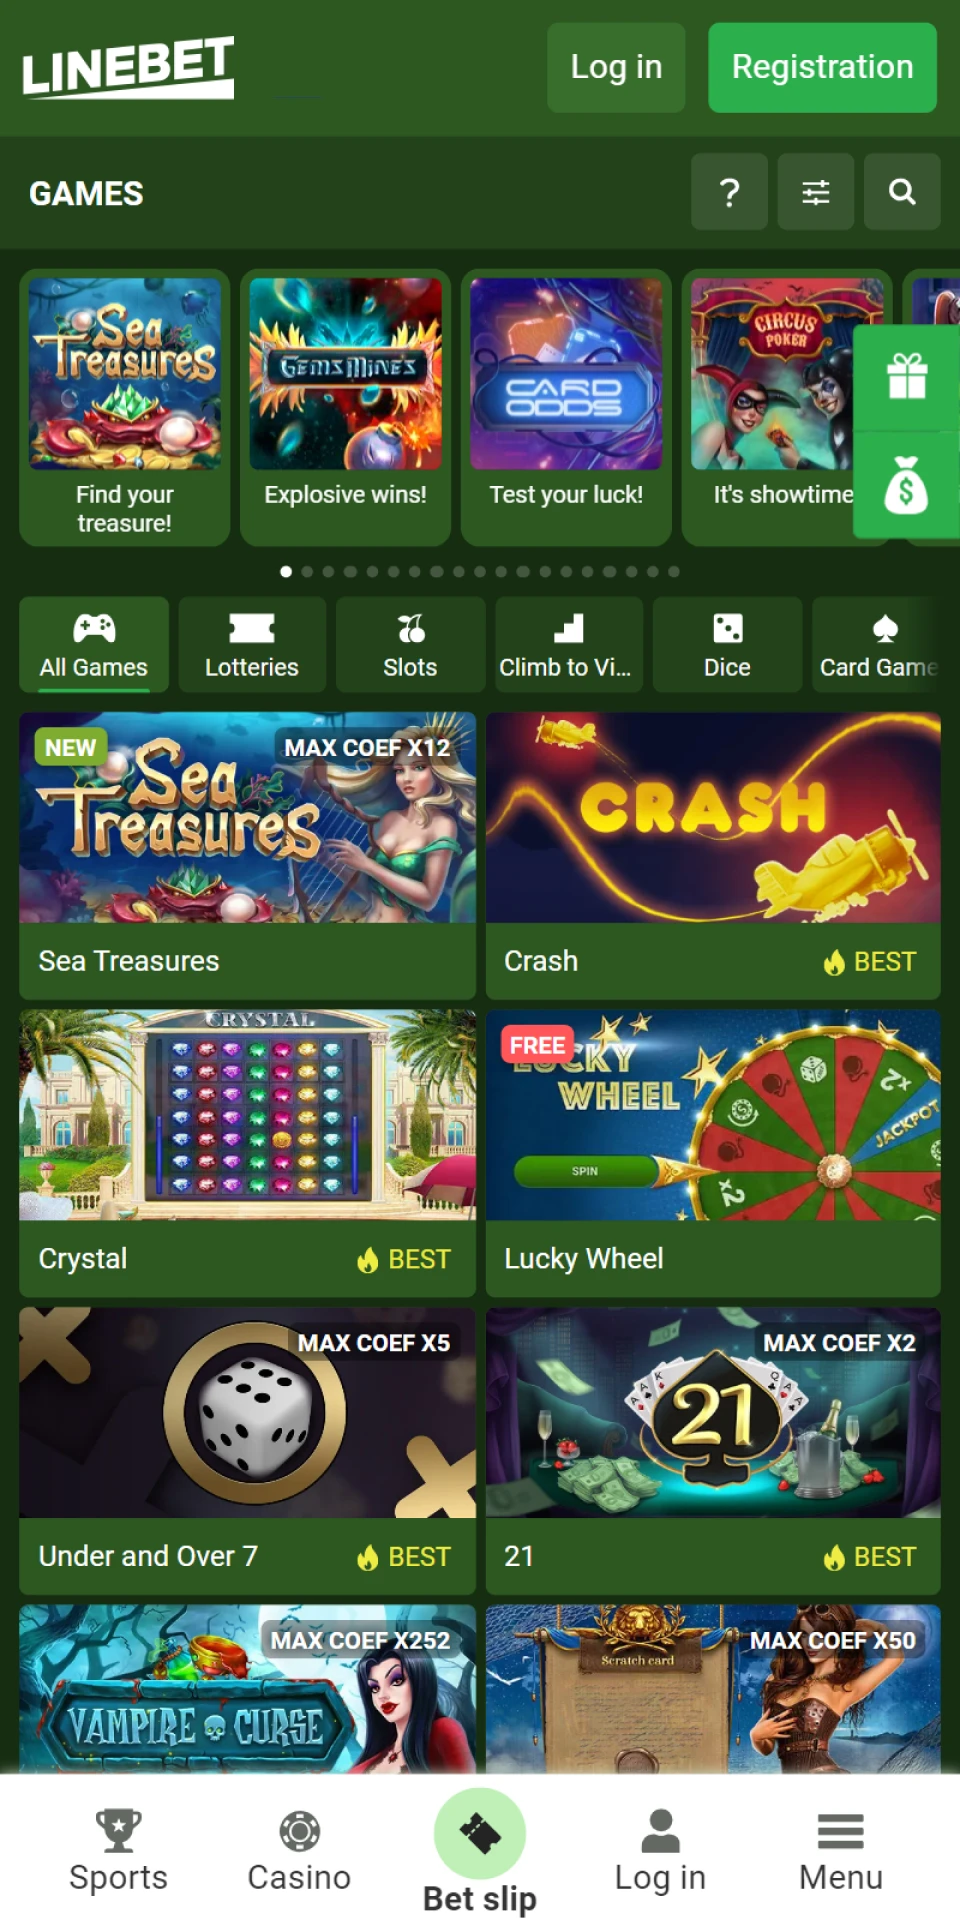 You can play casino games on the Linebet app.